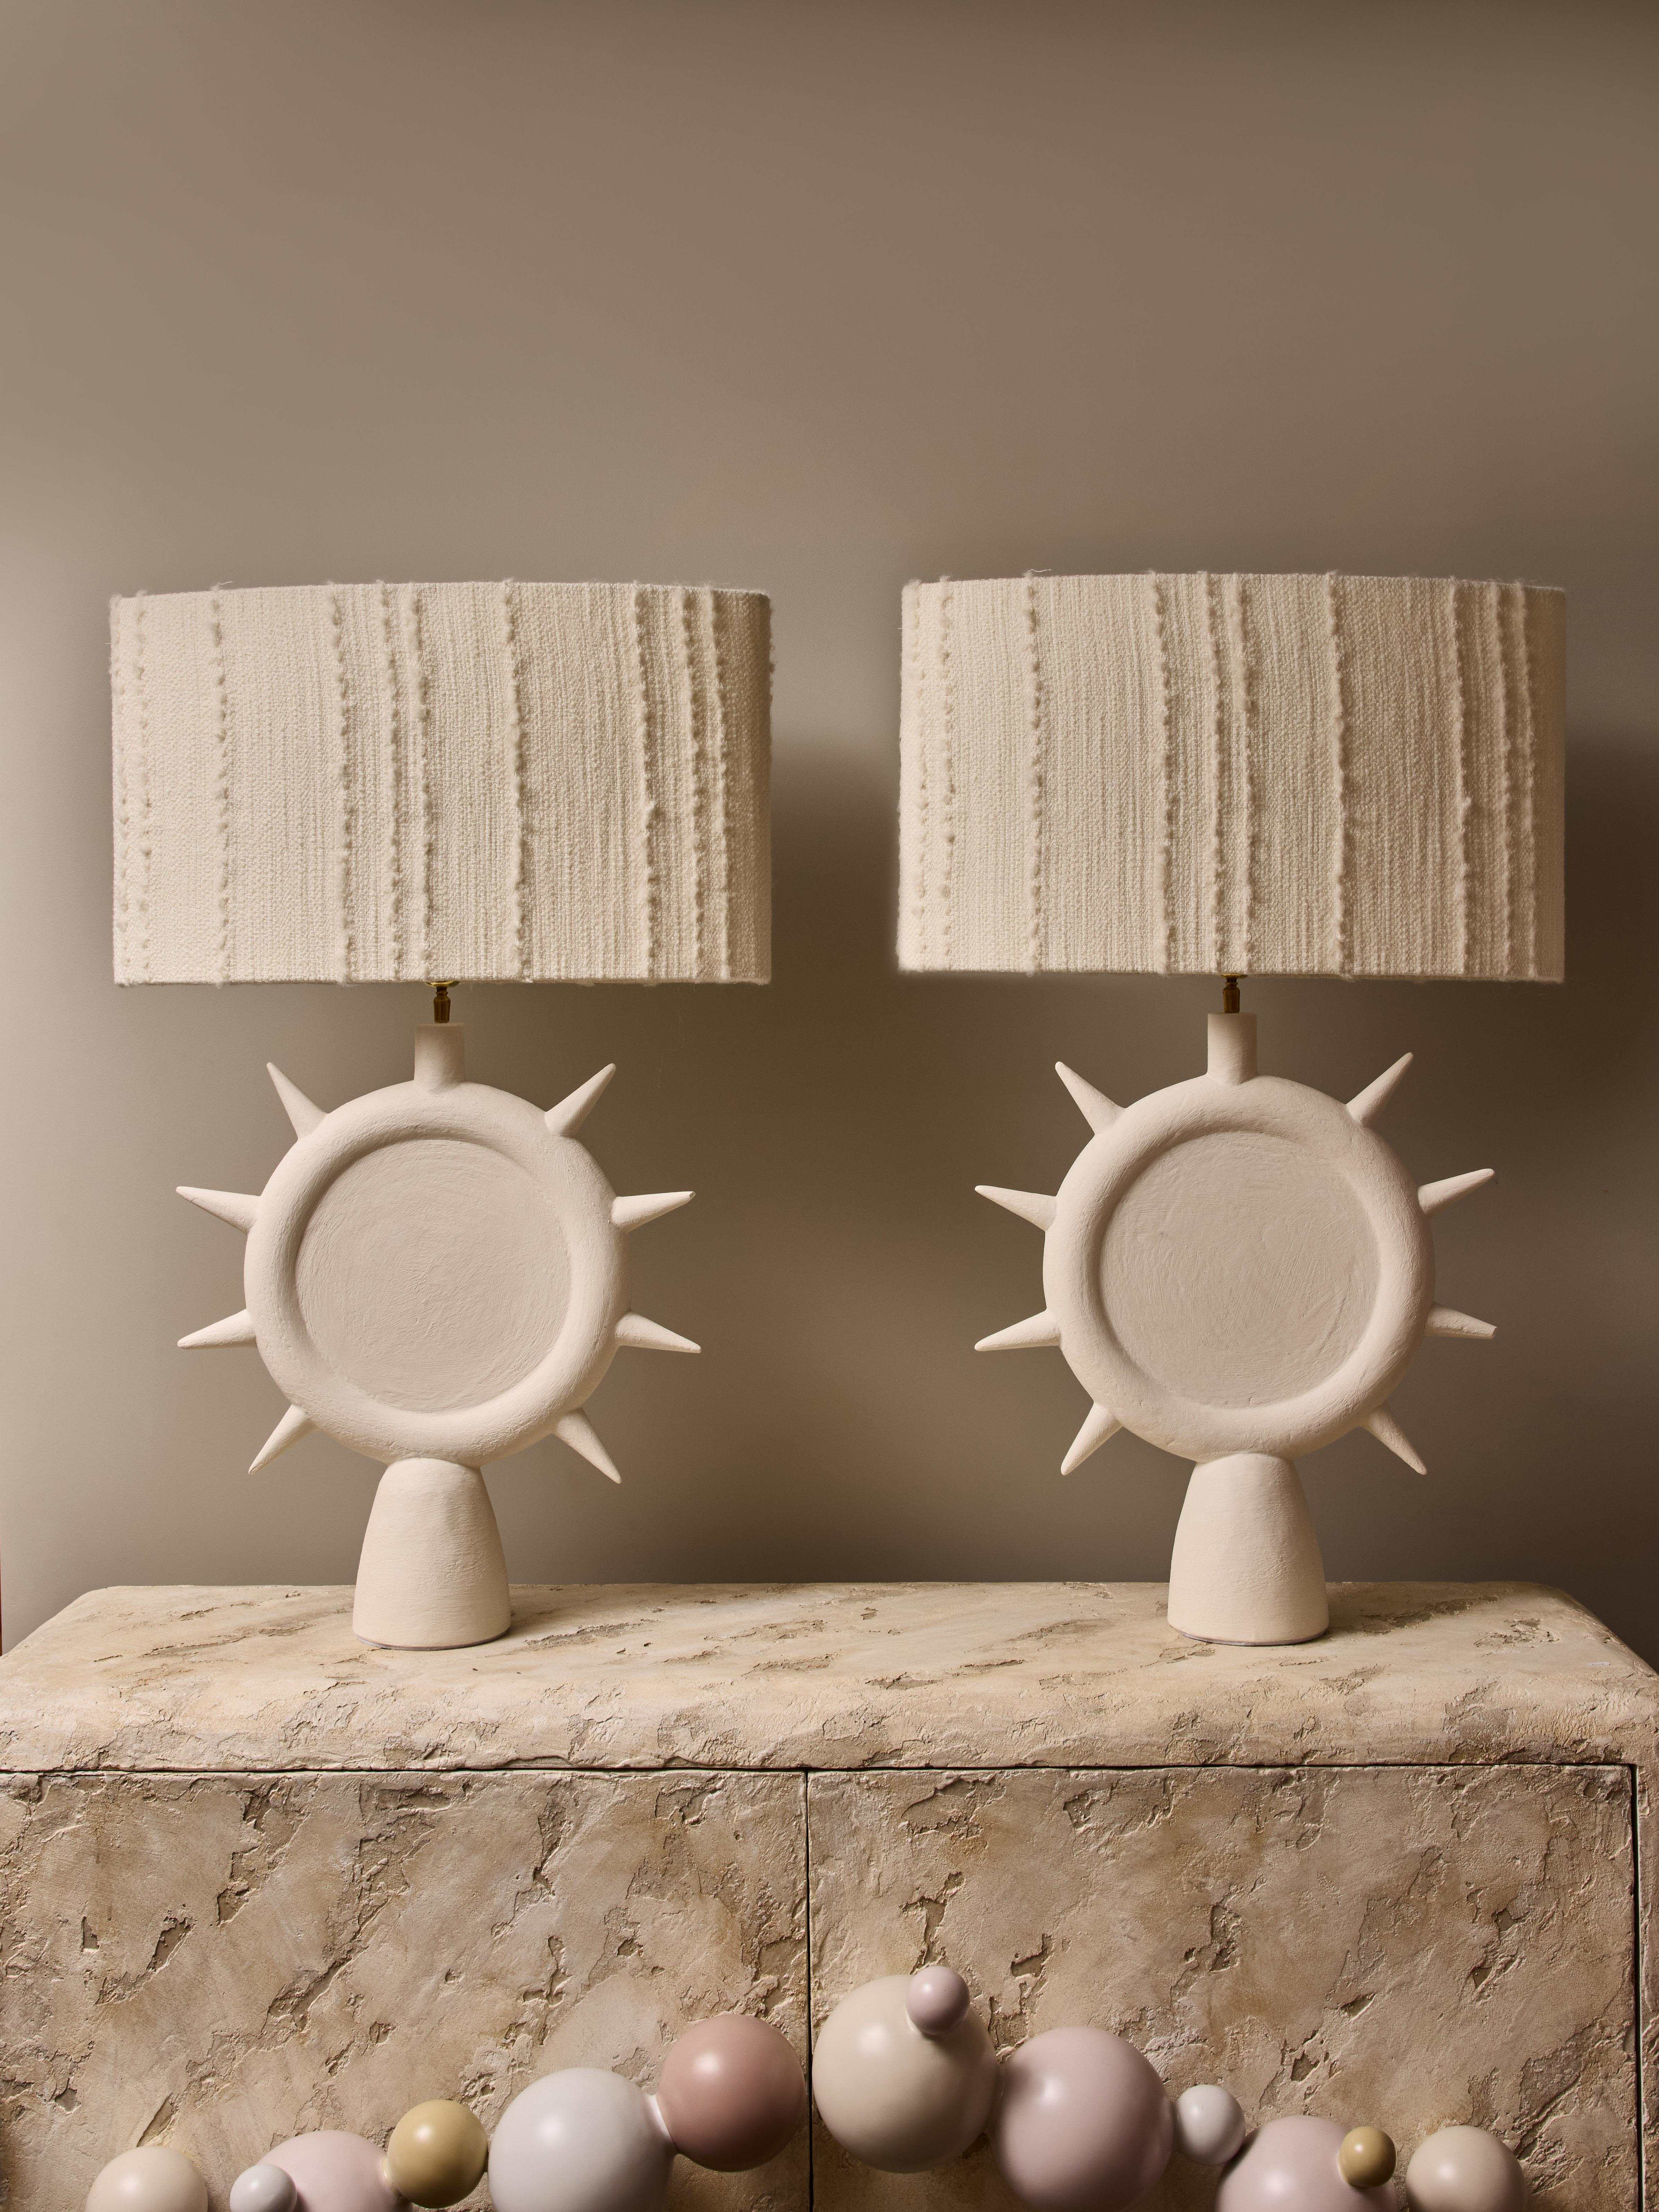 Pair of table lamps made of plaster, shaped like a sunshine with brass hardware. Topped with custom oval shades.

Dimensions with shades: 60x20H95cm